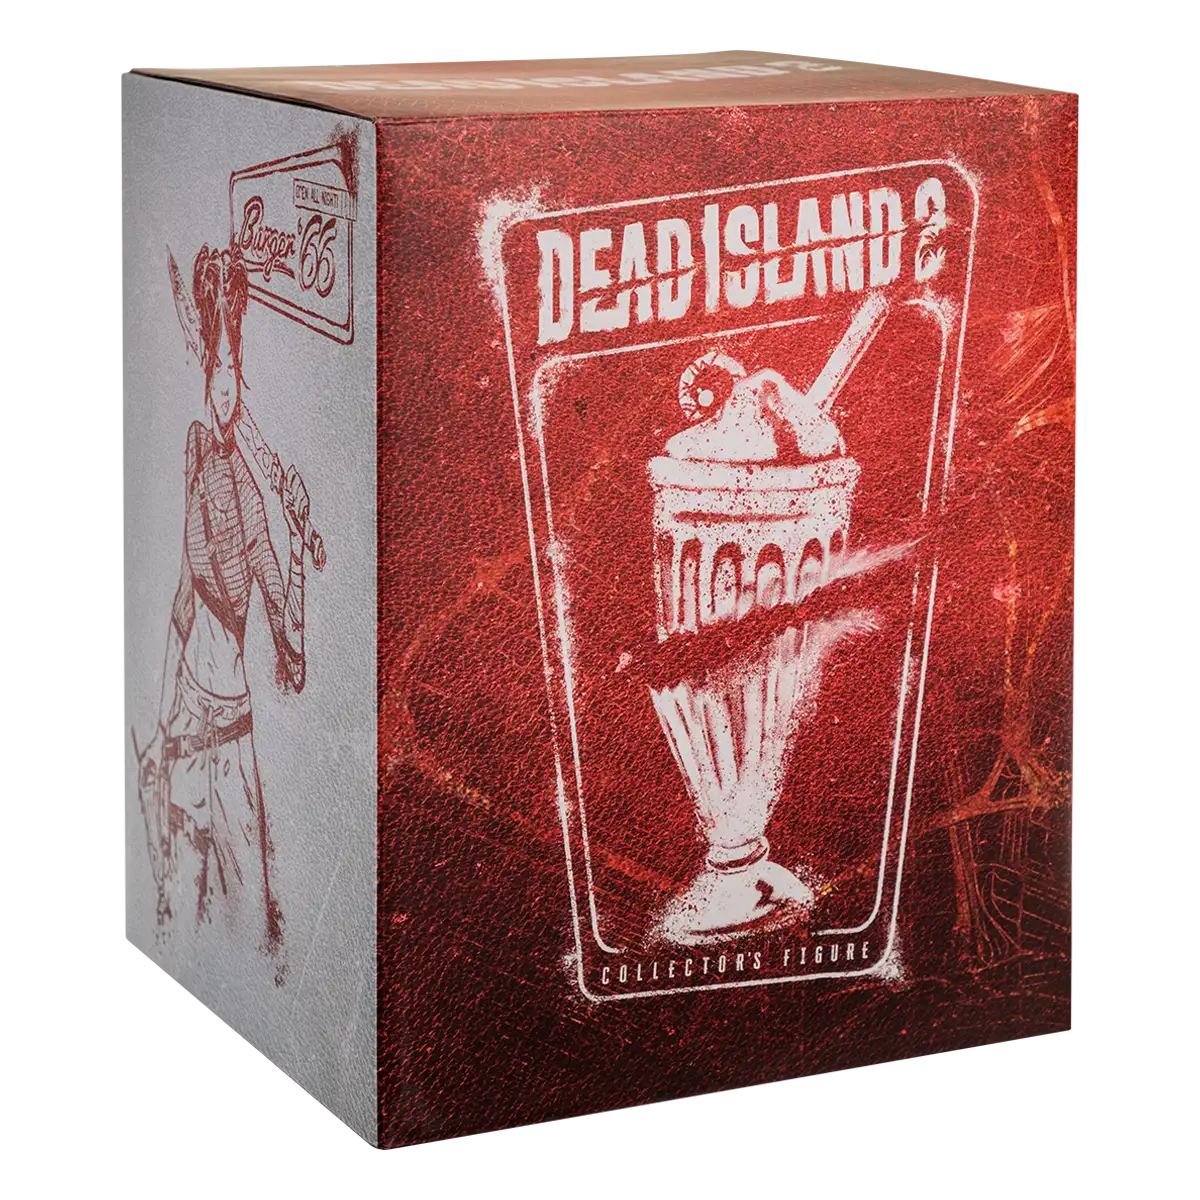 Dead Island 2 Collector's Statue "Amy" Image 13